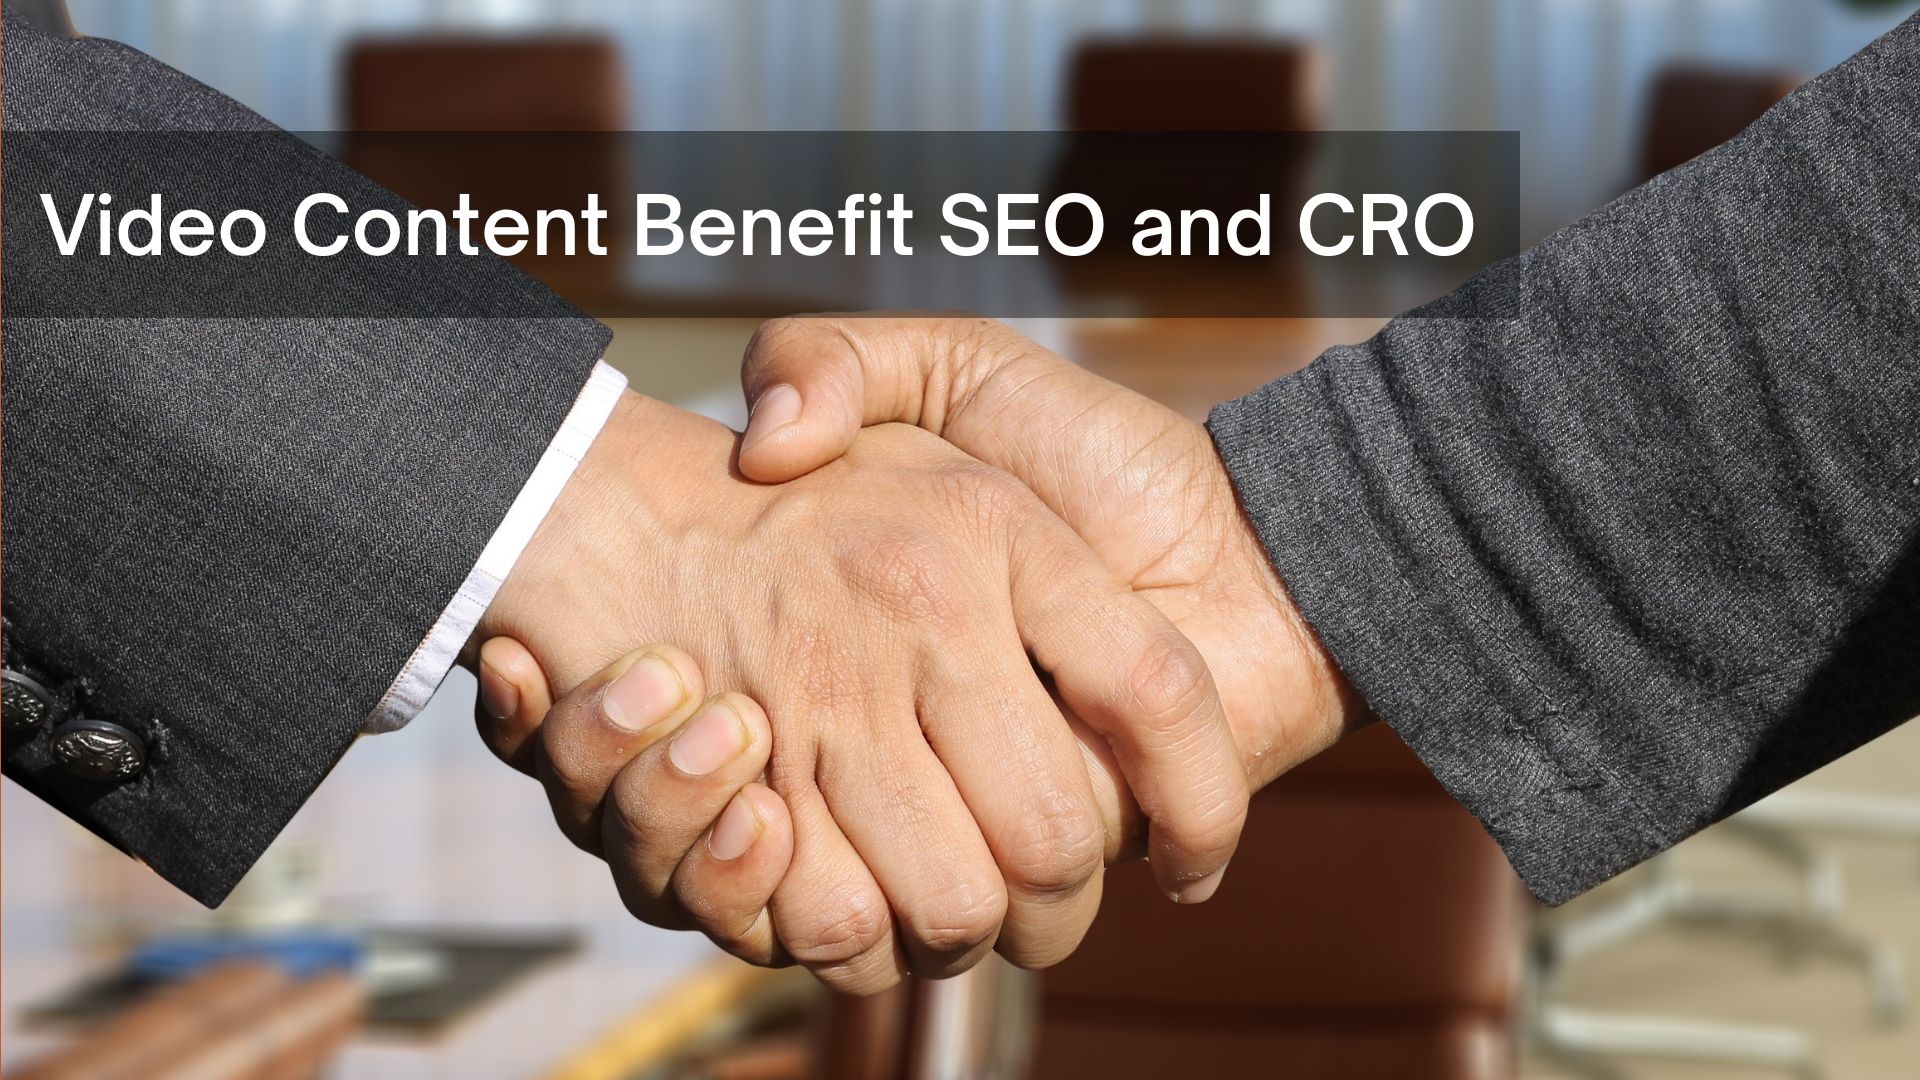 Video Content Benefit SEO and CRO